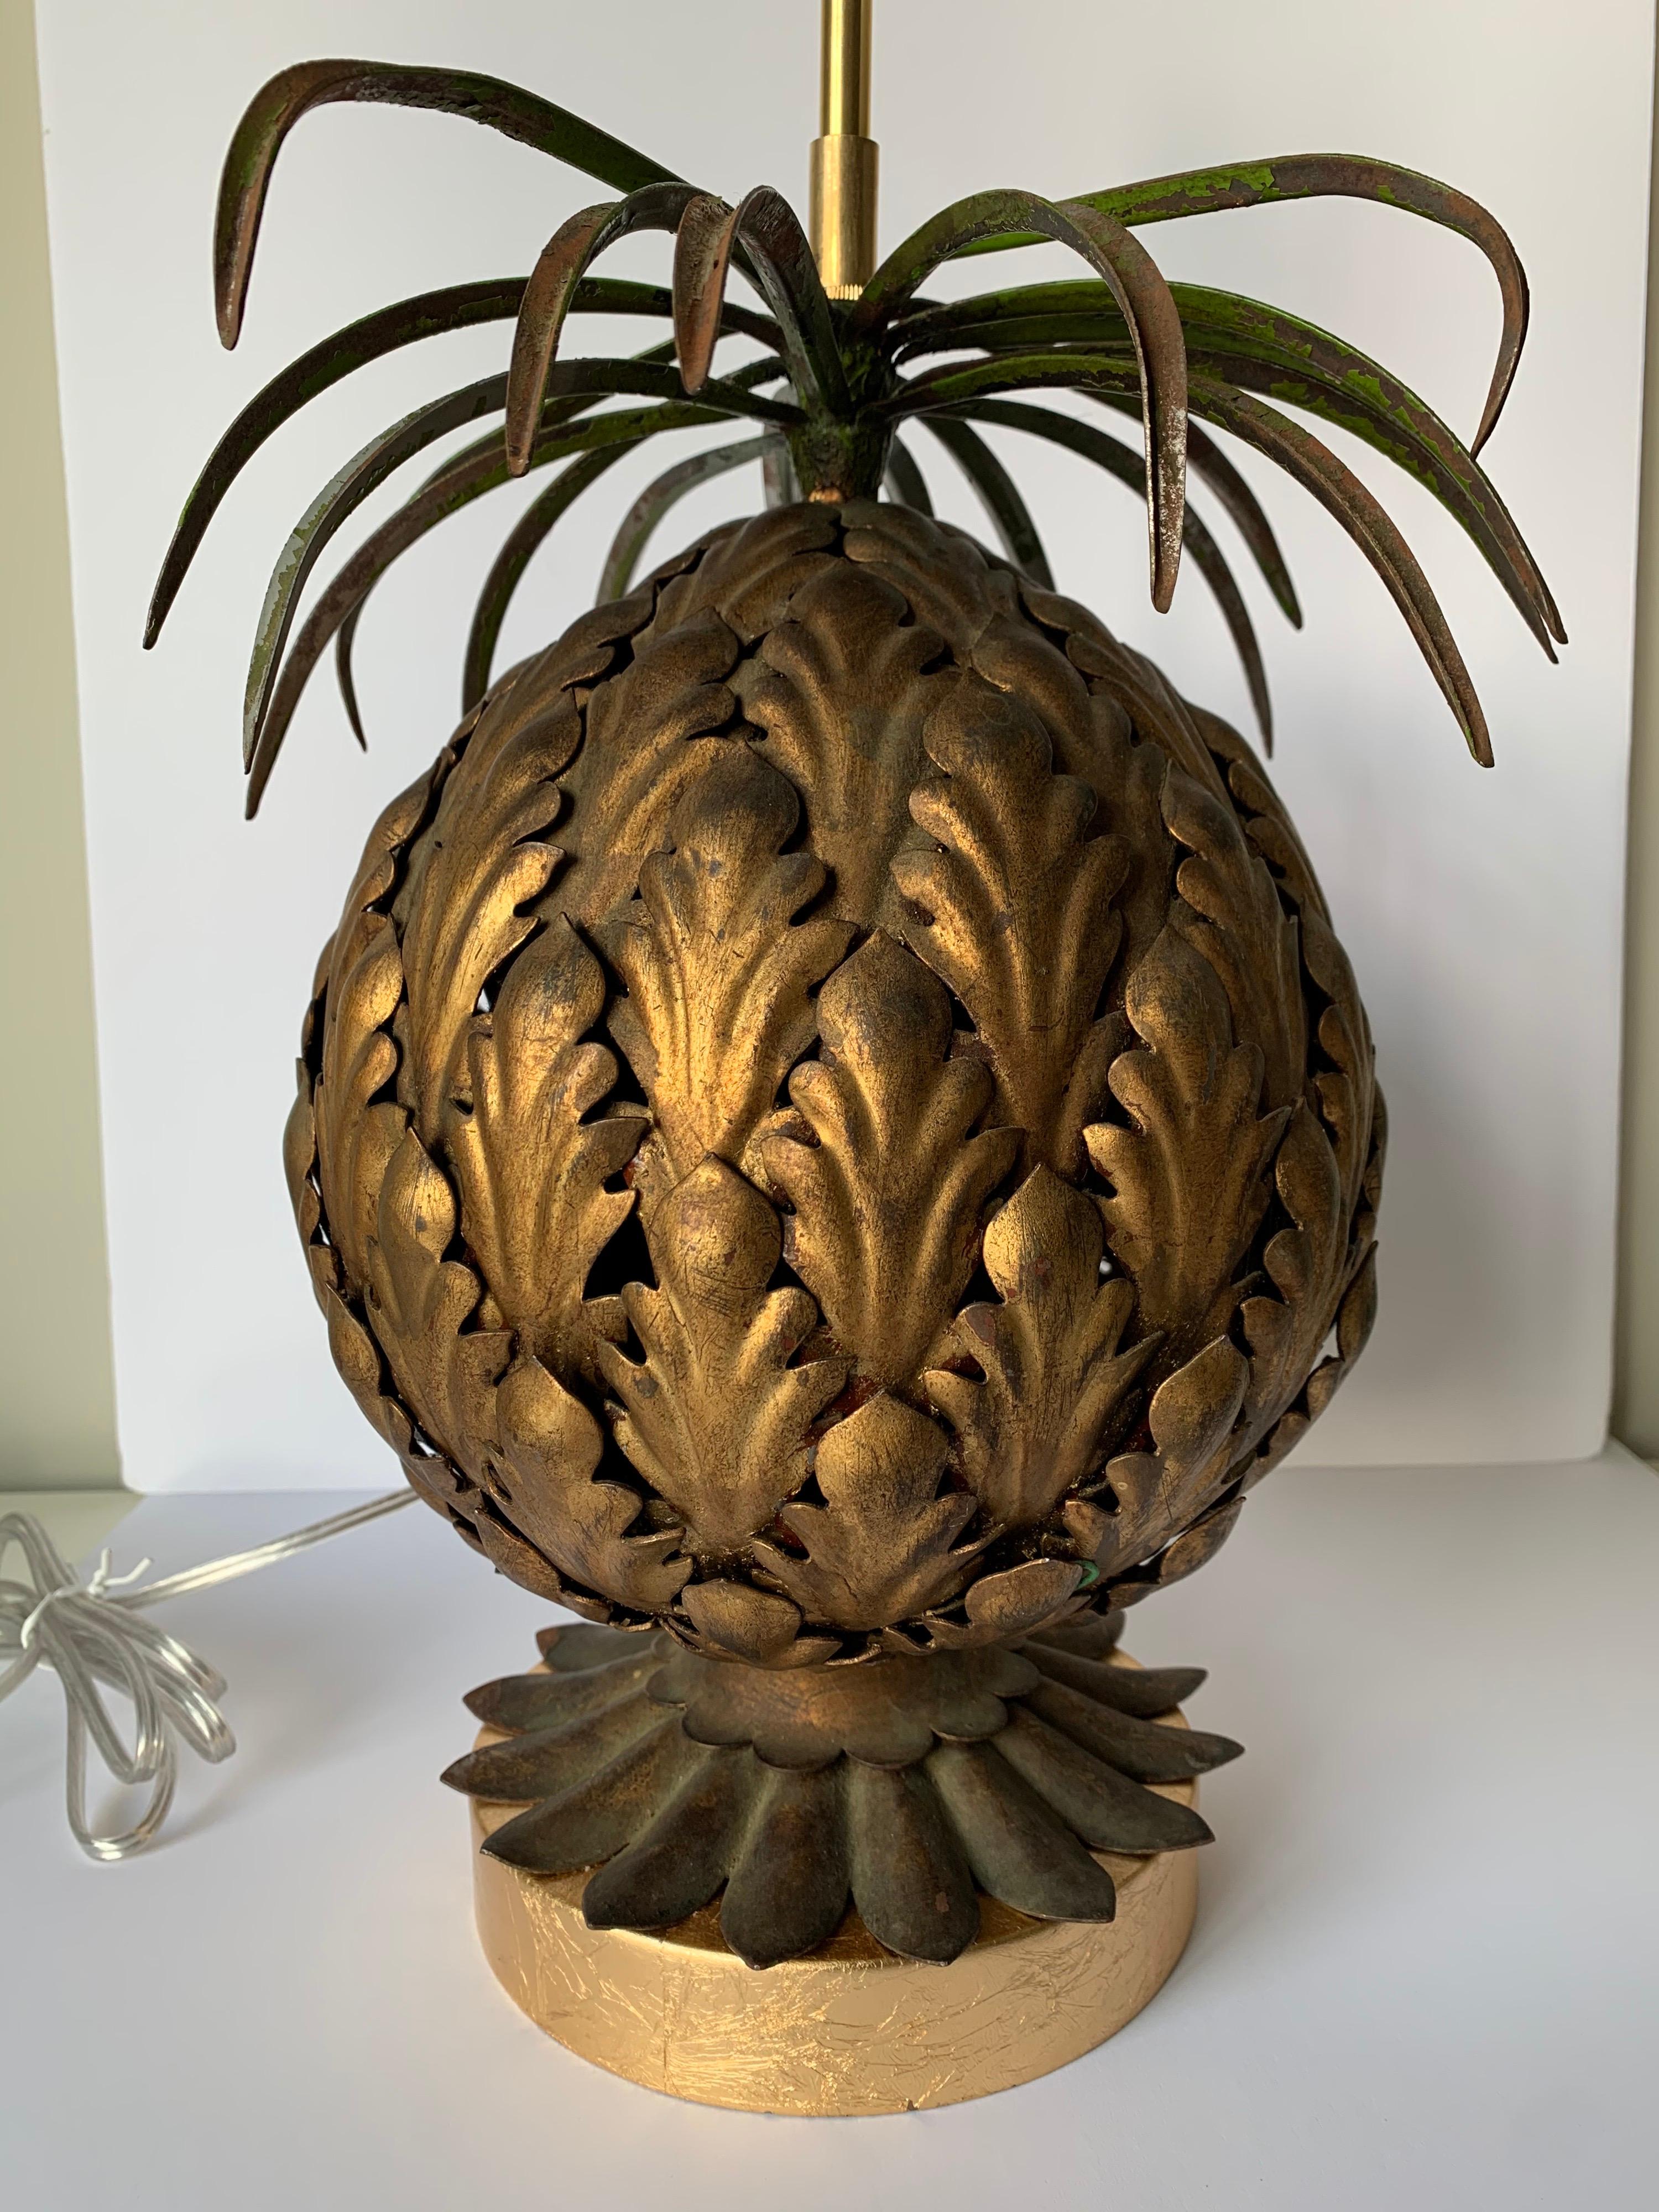 1950s Italian gilt metal pineapple motif lamp. Newly rewired with new gold painted wood base. Lamp takes one standard bulb (not included). Lamp has overall age related wear and overall paint loss, consistent with the antique finish. Lamp is 20” tall